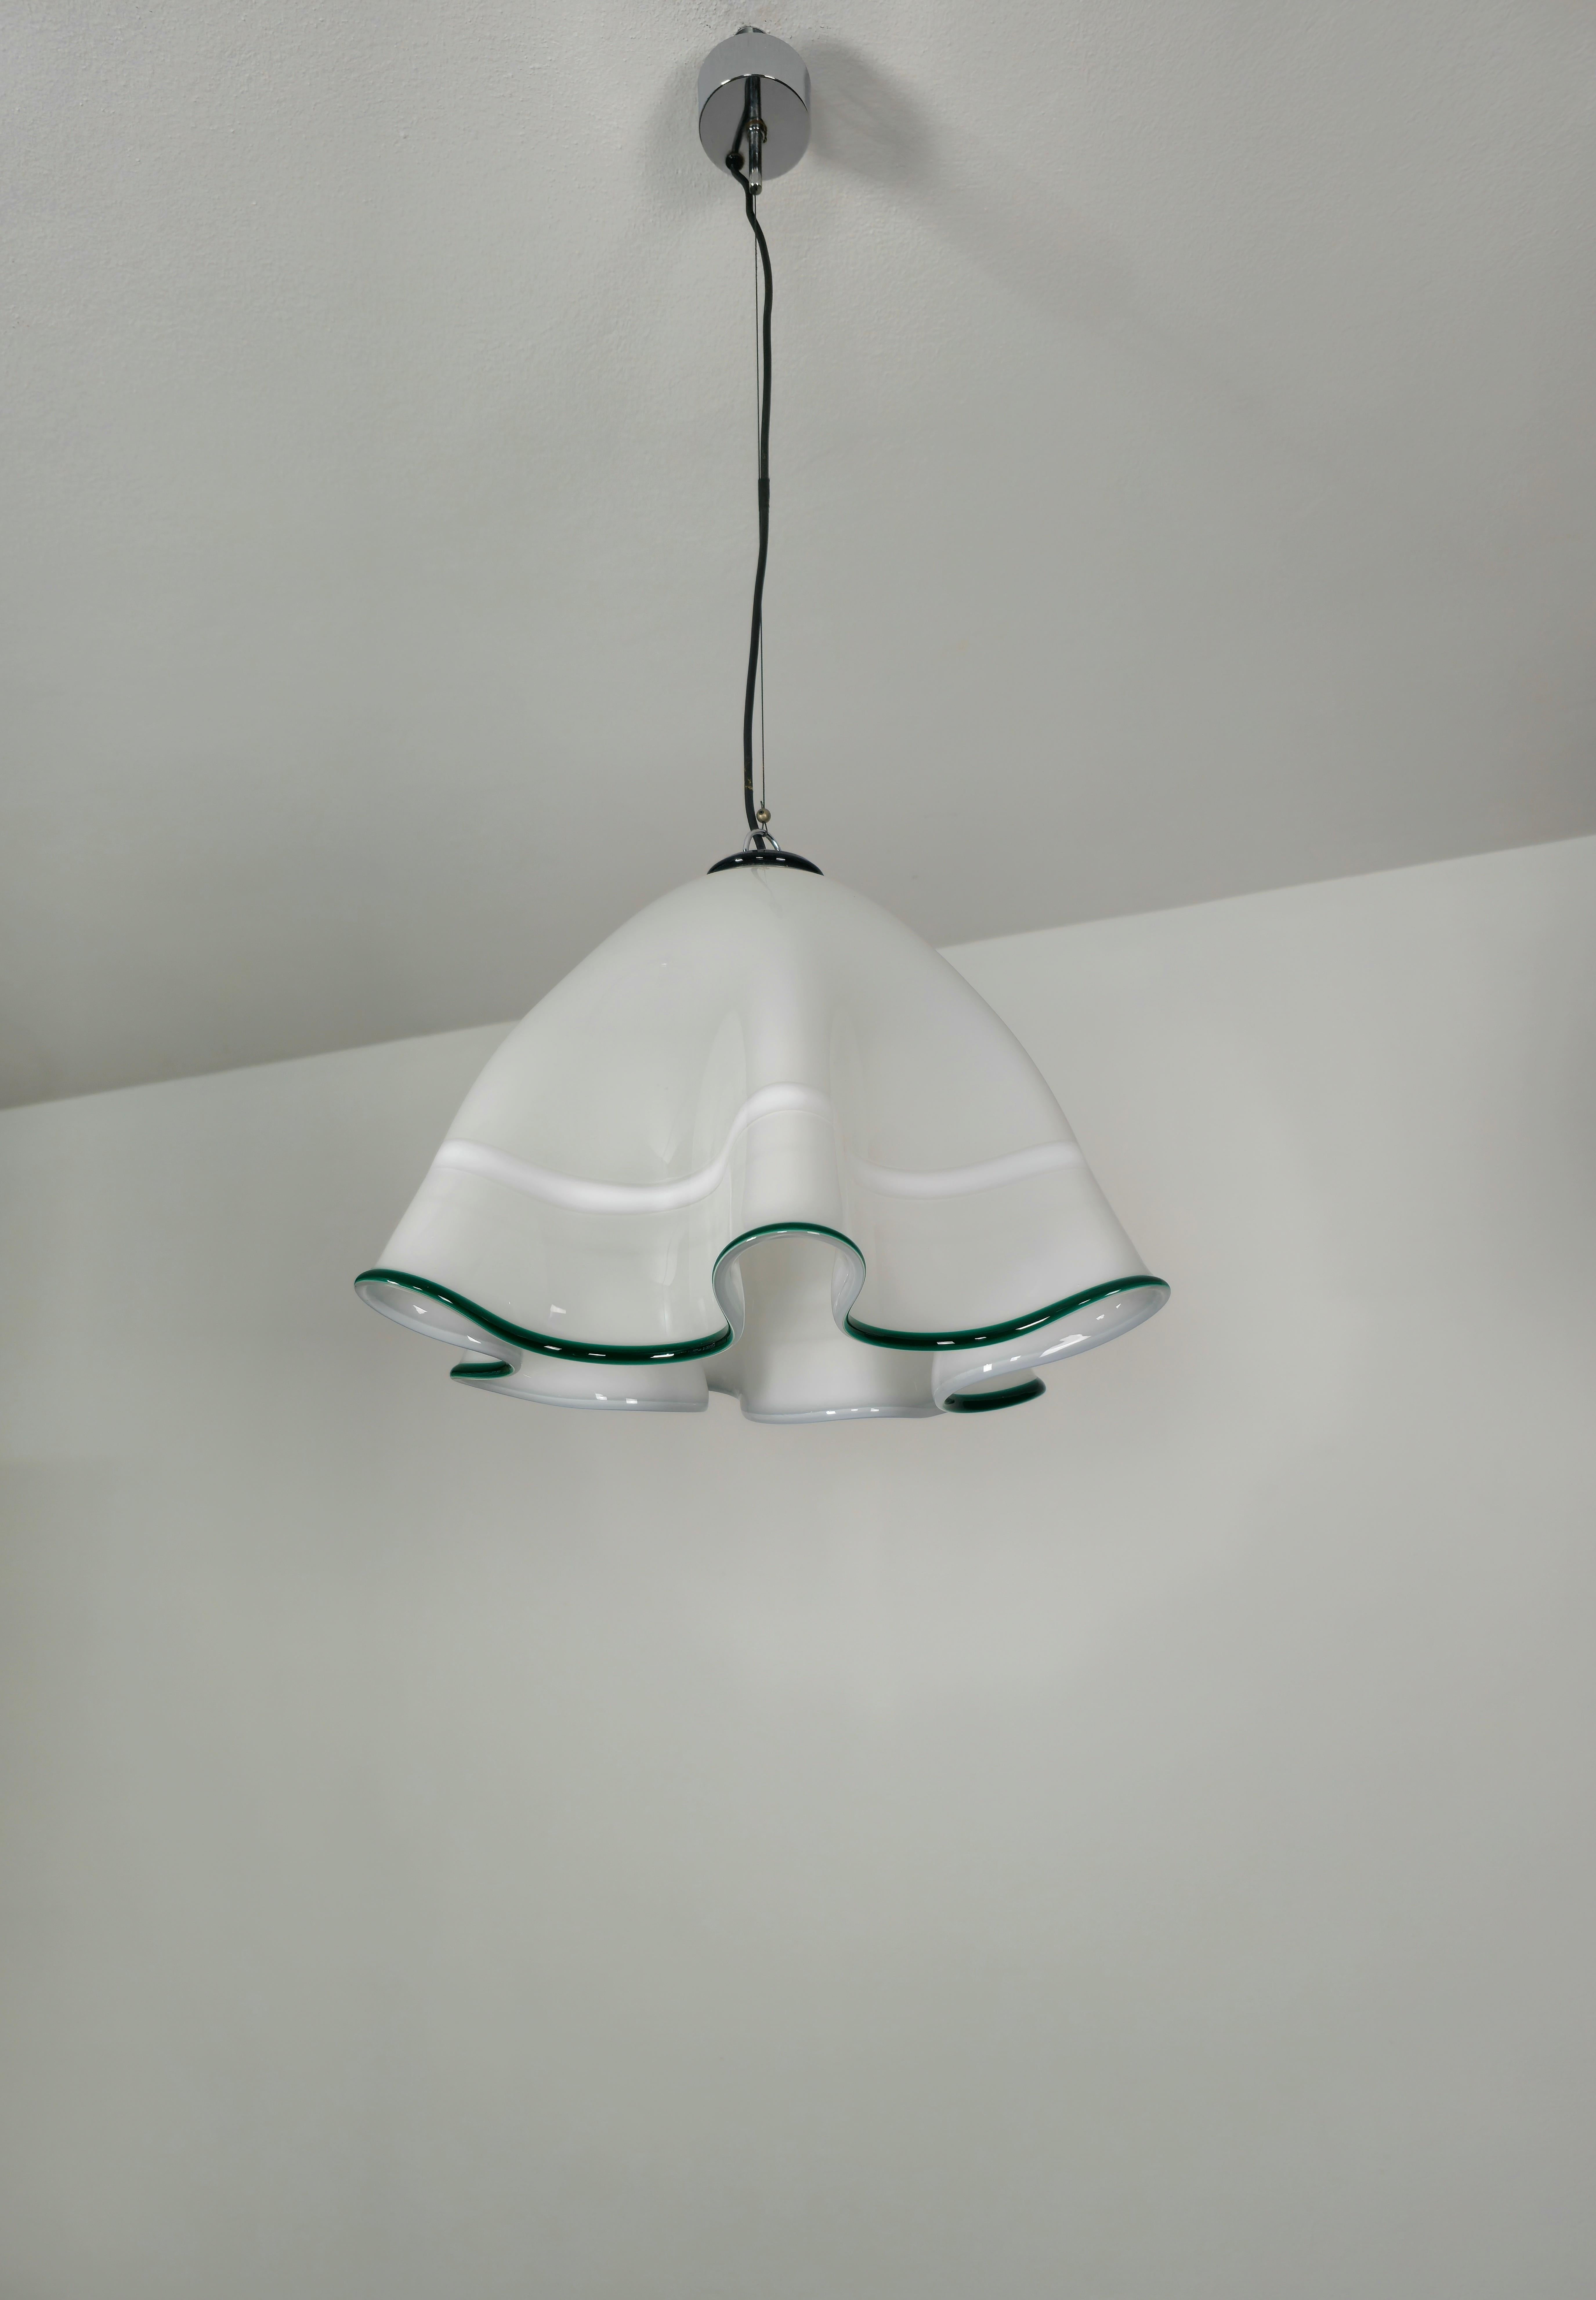 Zenda model suspension lamp designed in the 70s by the Italian designer Luciano Vistosi.
The suspension lamp was made with a hand blown and hand-shaped Murano glass with a forest green border and a chromed metal ceiling rose.